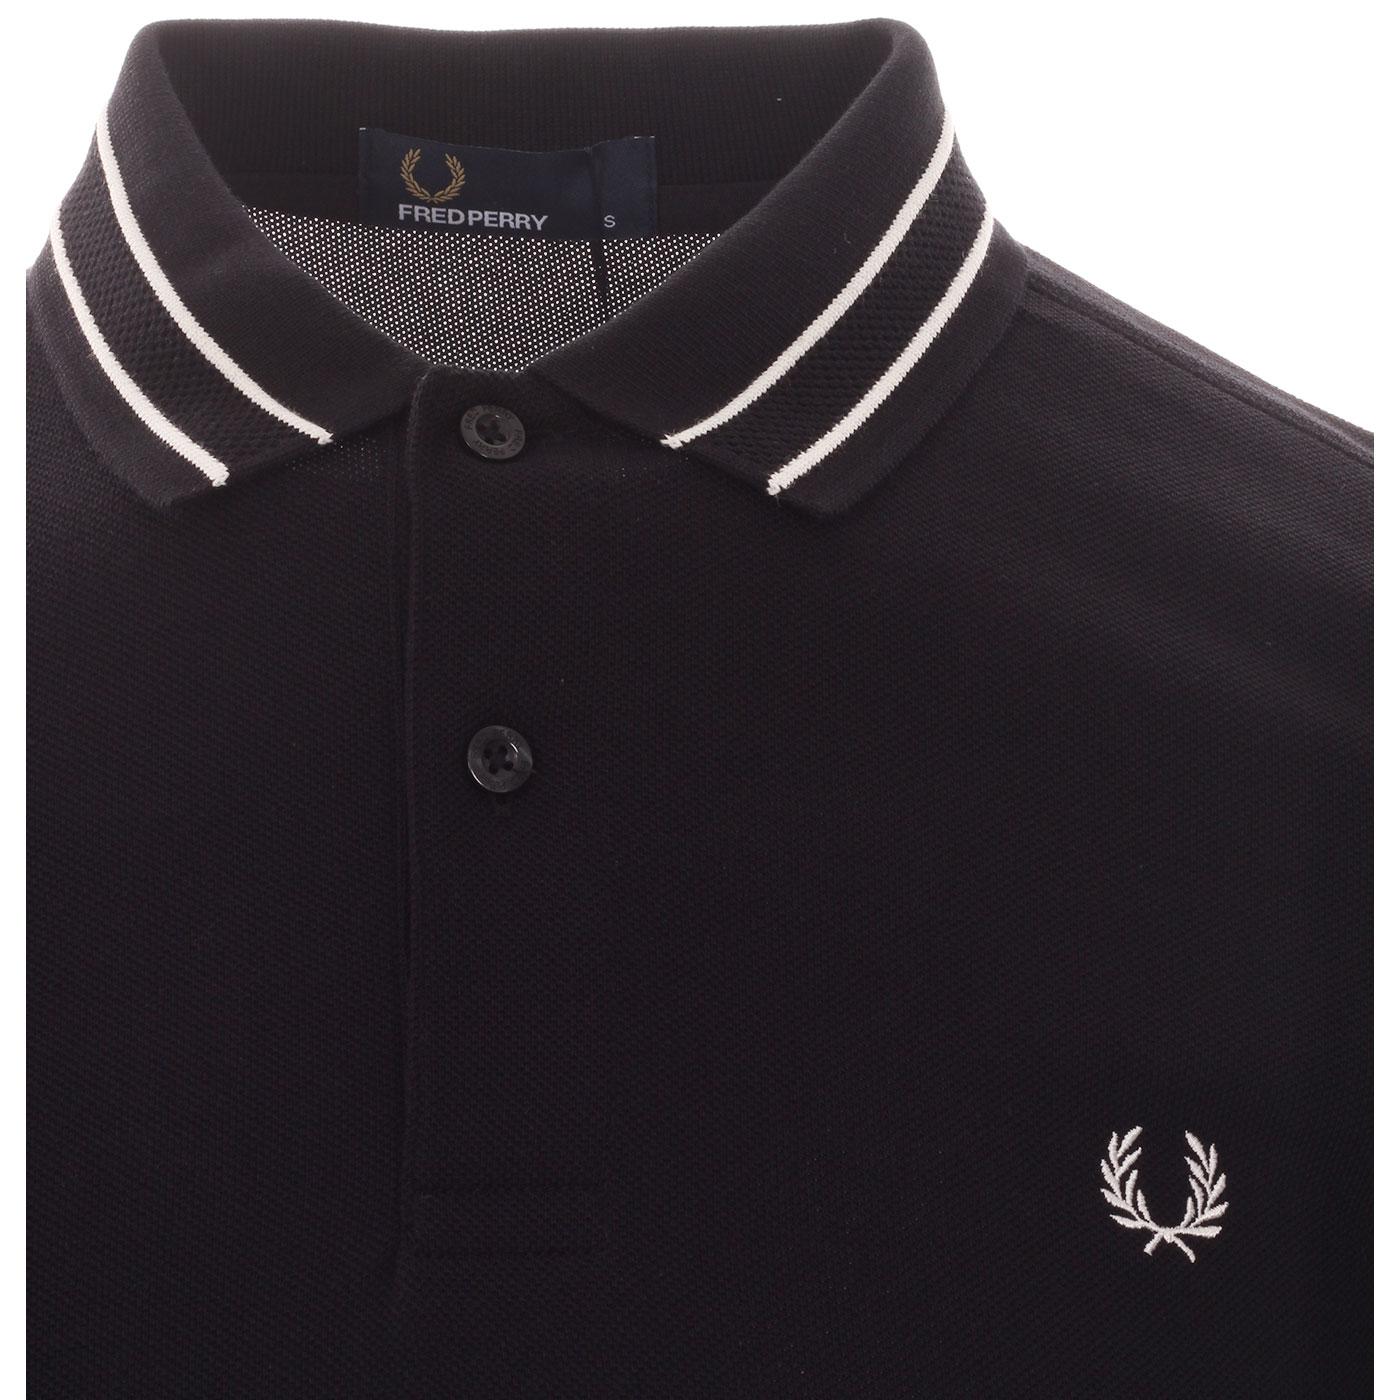 FRED PERRY Tramline Tipped Mod Pique Polo Shirt in Black